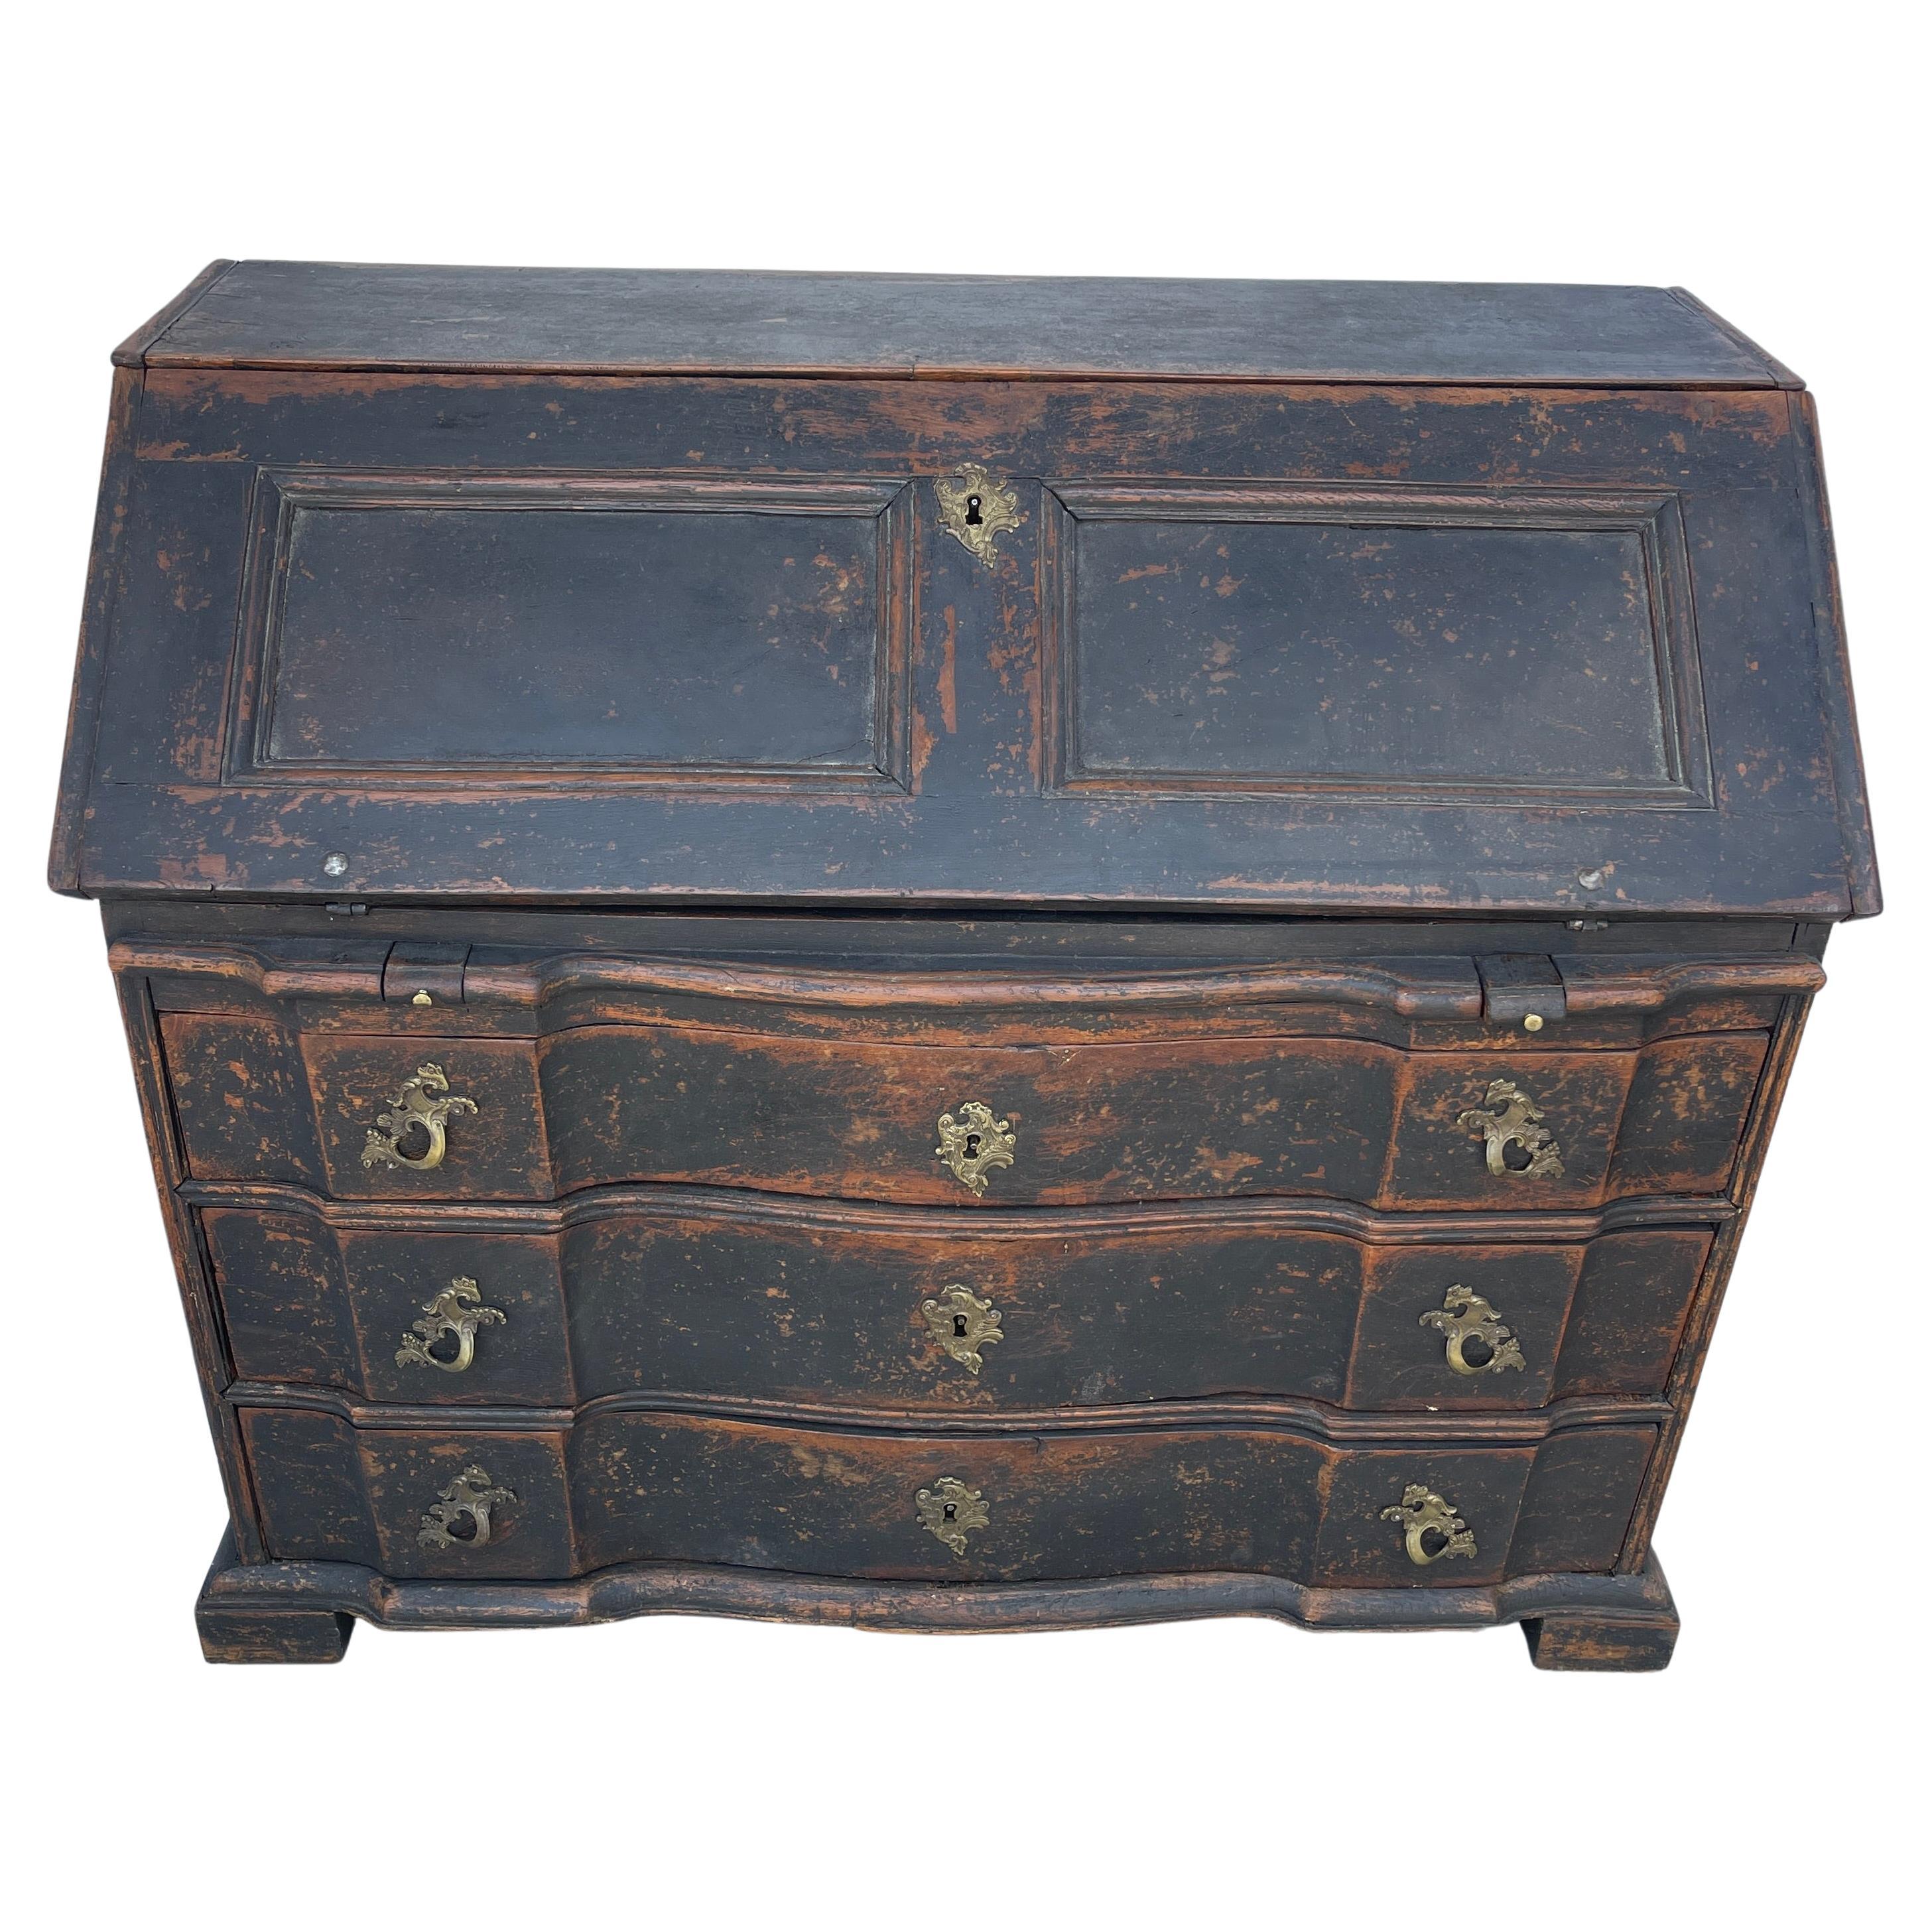 Hand-Crafted Black Painted Gustavian Style Writing Desk Secretary, 18th Century Denmark For Sale